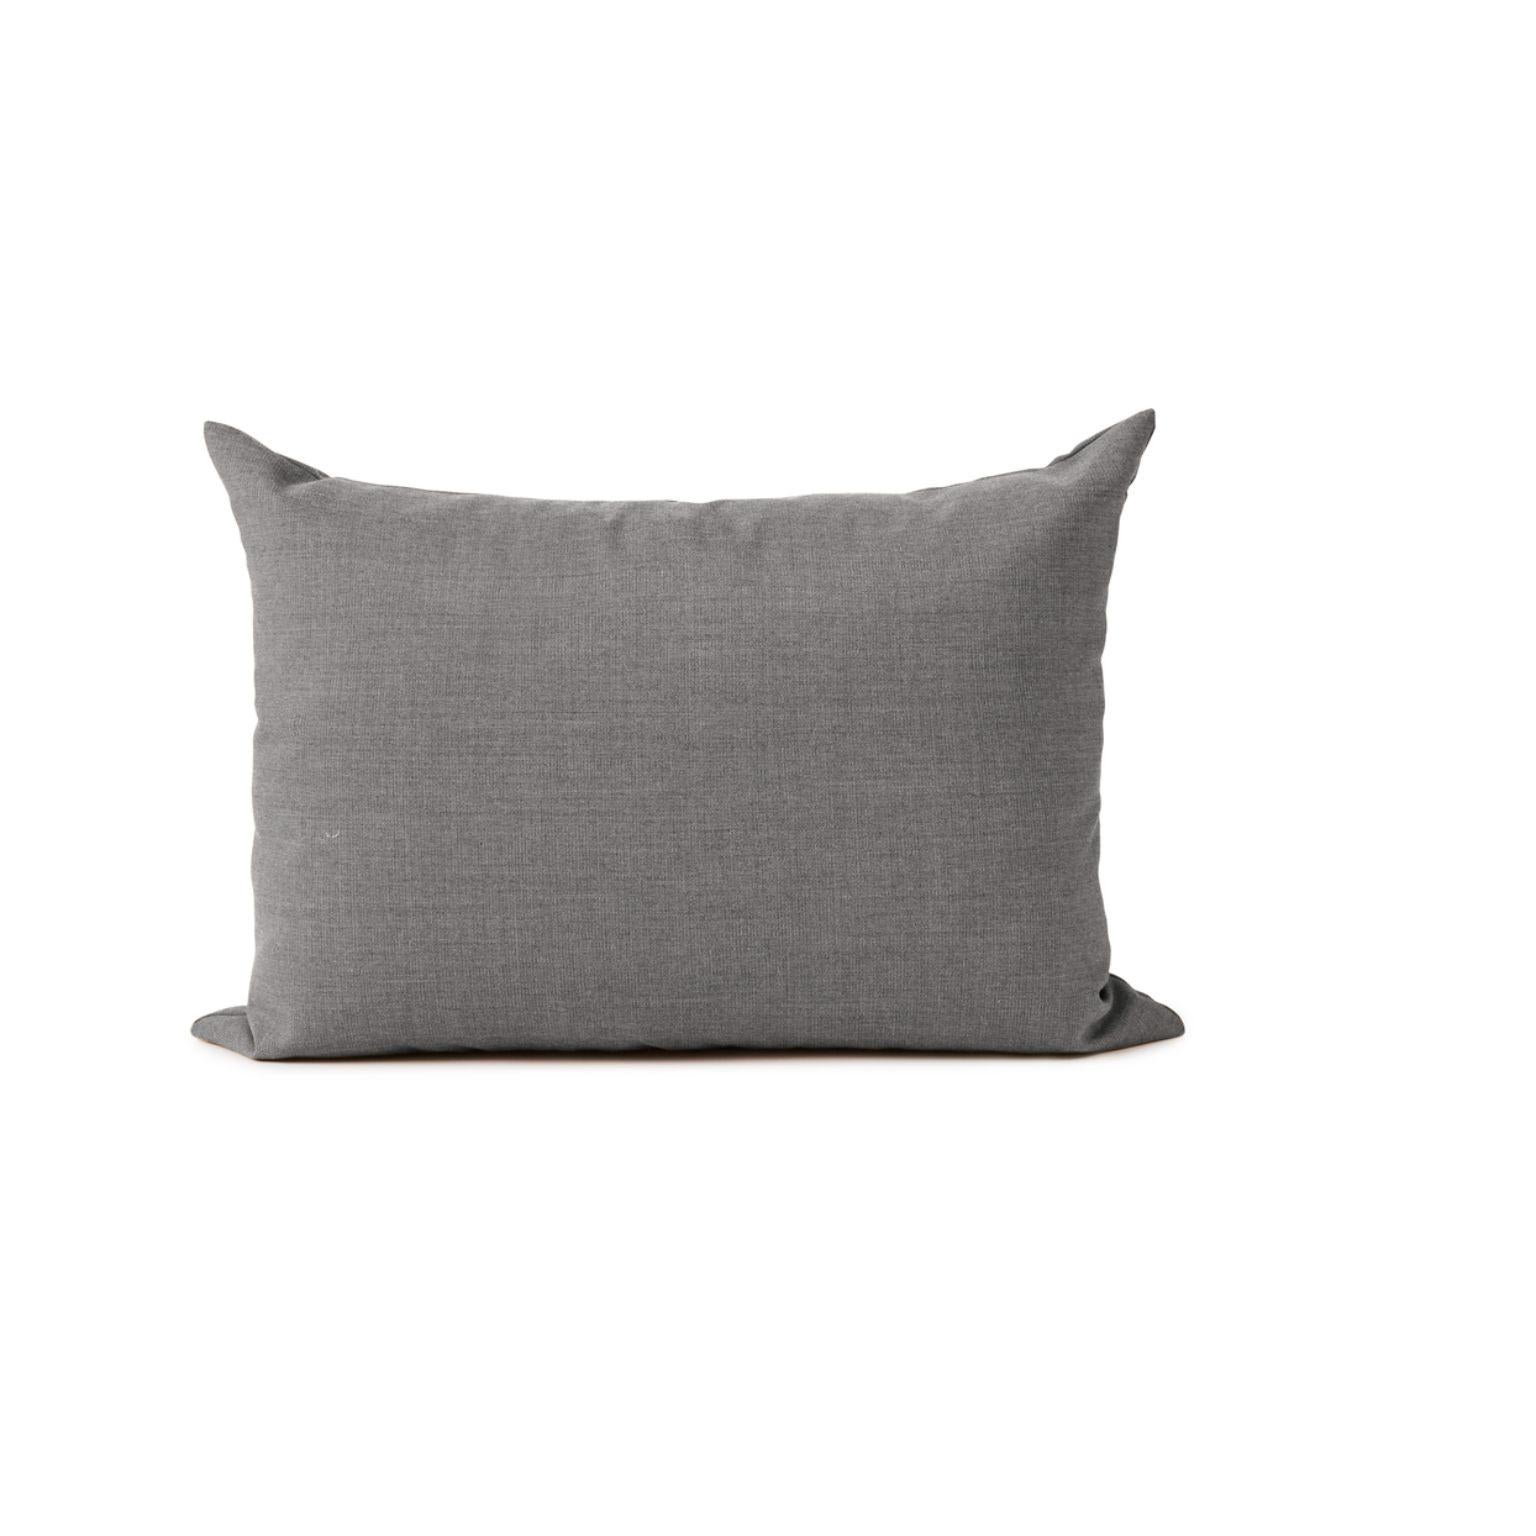 Galore cushion square grey melange by Warm Nordic
Dimensions: W 70 x D 15 x H 50 cm
Material: Textile upholstery, Granulate and feathers filling.
Weight: 1.4 kg
Also available in different colors and finishes. 

An elegant oversized sofa